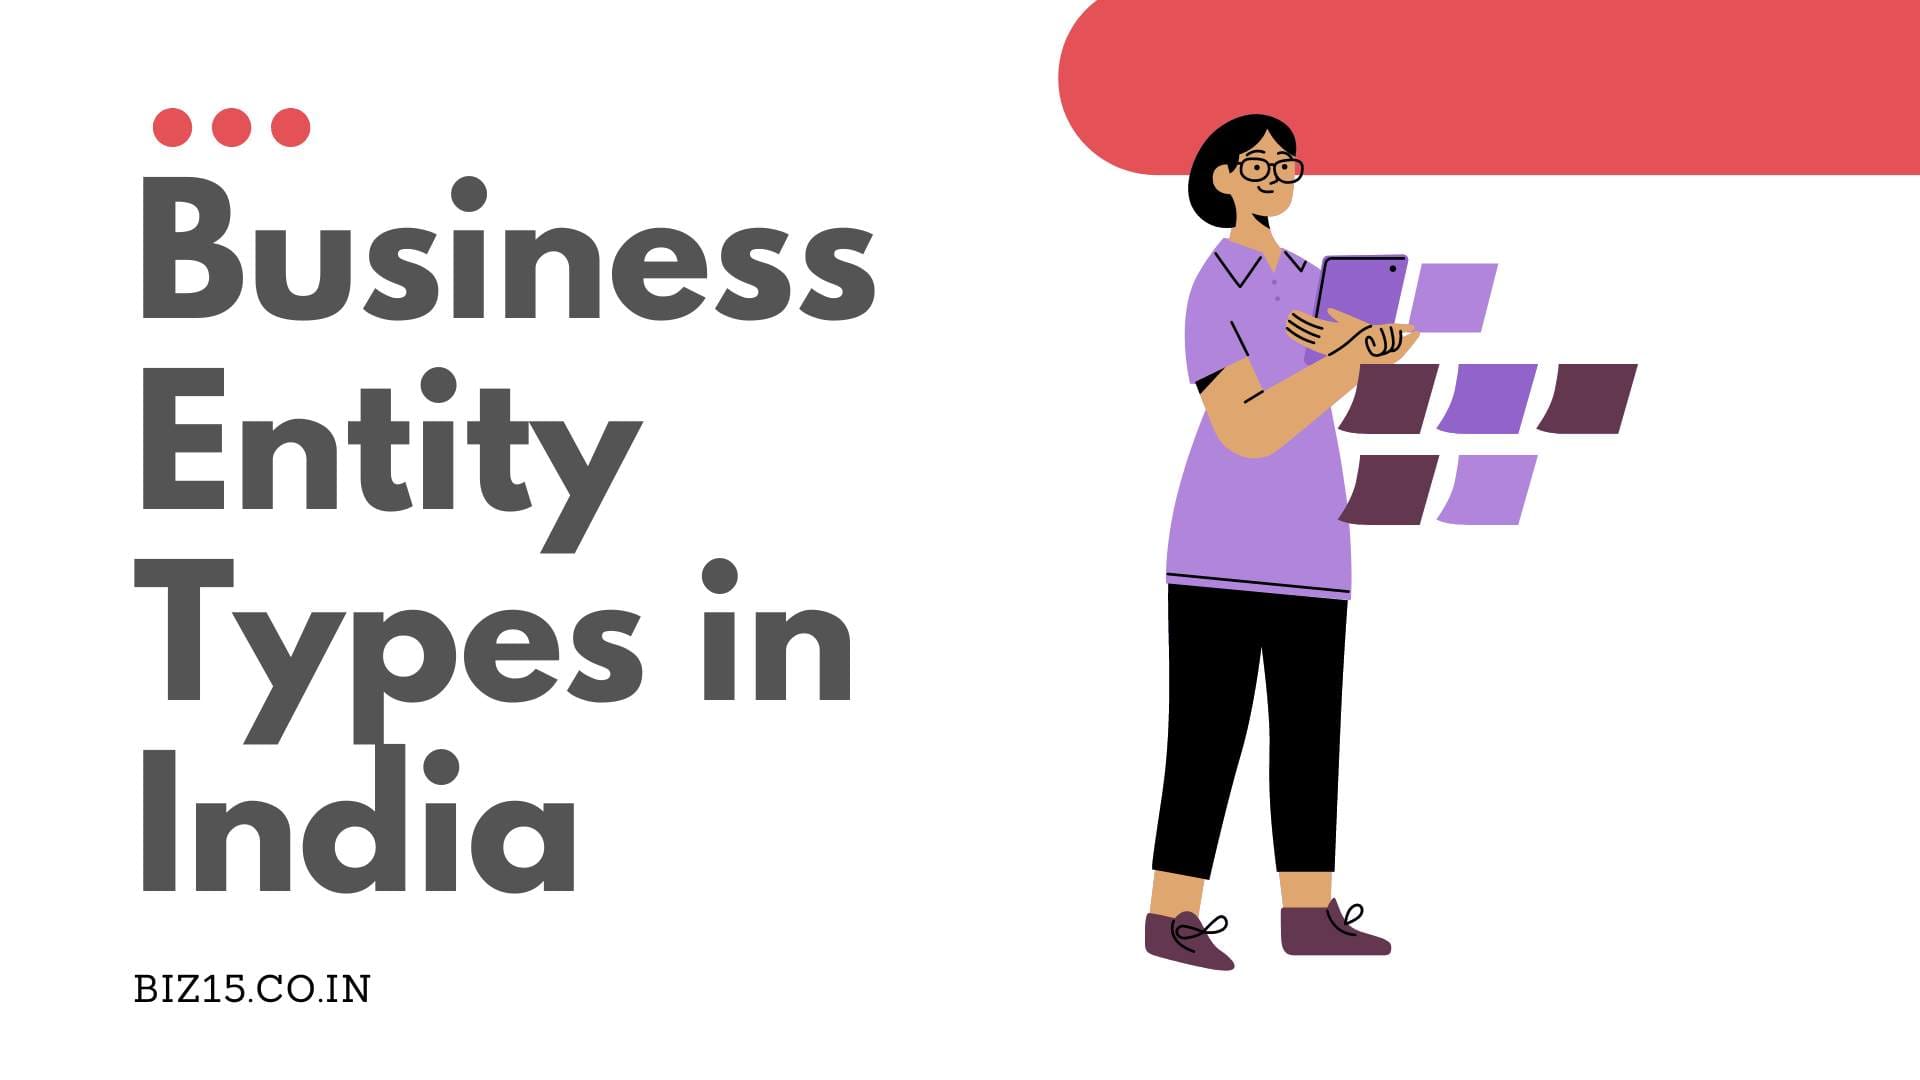 Business Entity Types in India